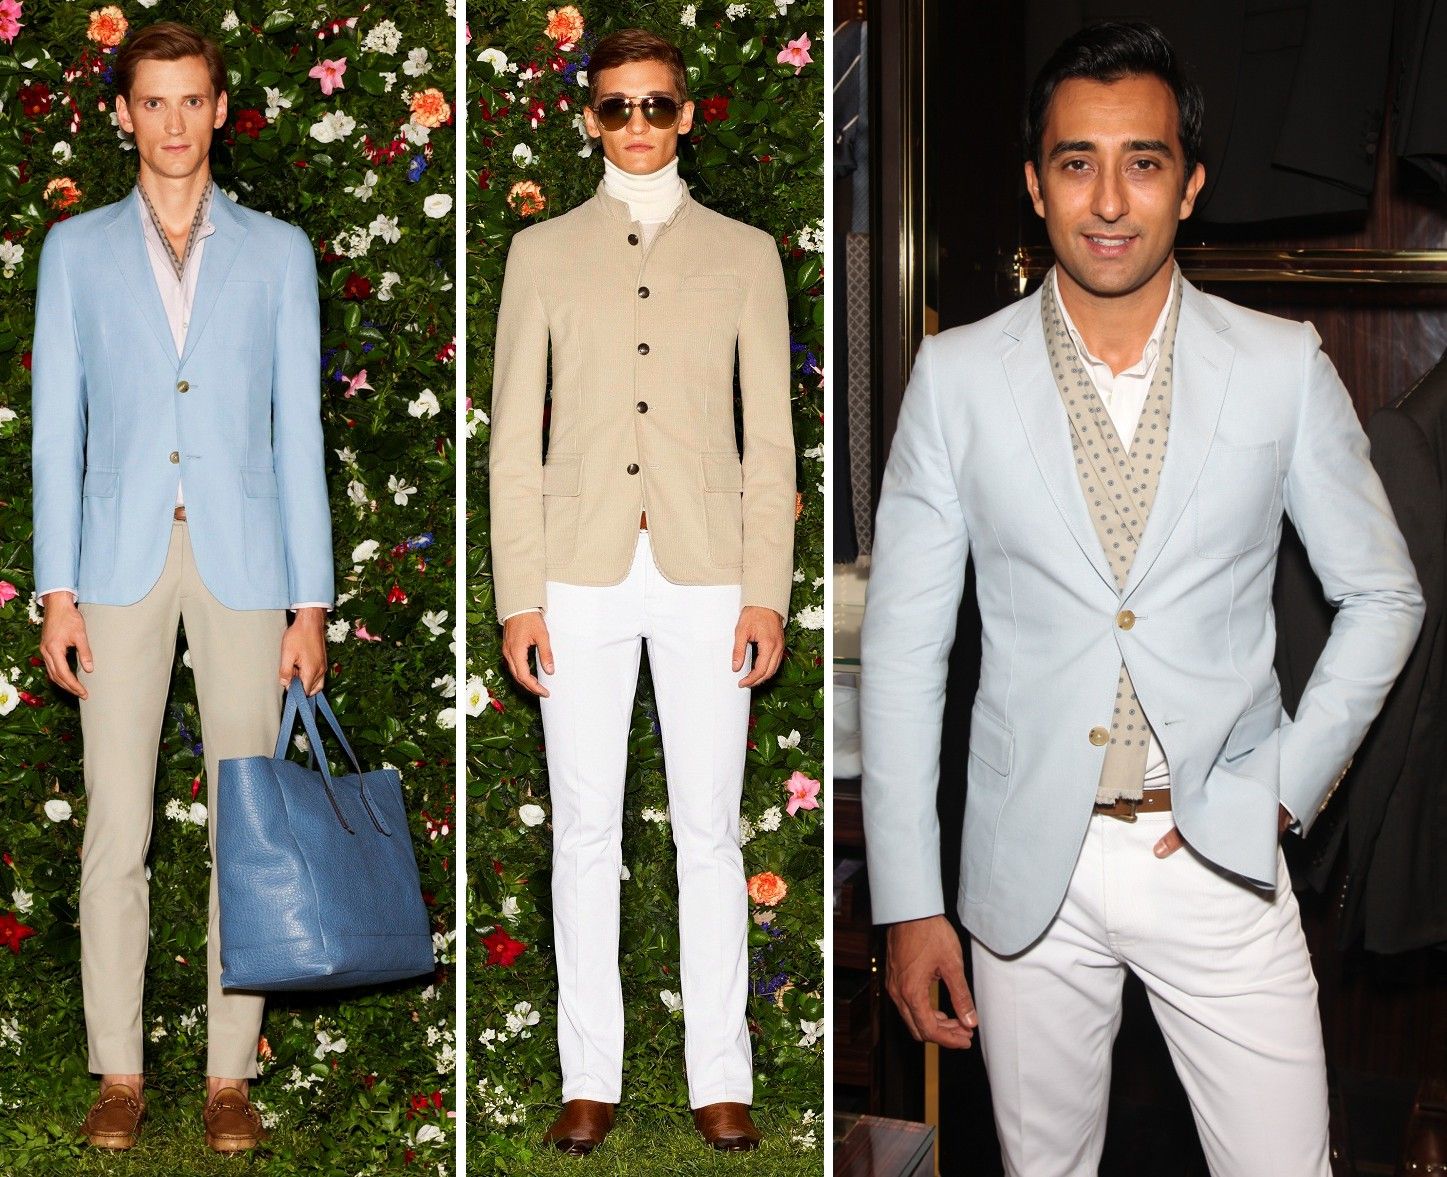 Rahul Khanna in Gucci Cruise 2013 at the Gucci store opening in The Oberoi, Gurgaon (Photo courtesy | Gucci)